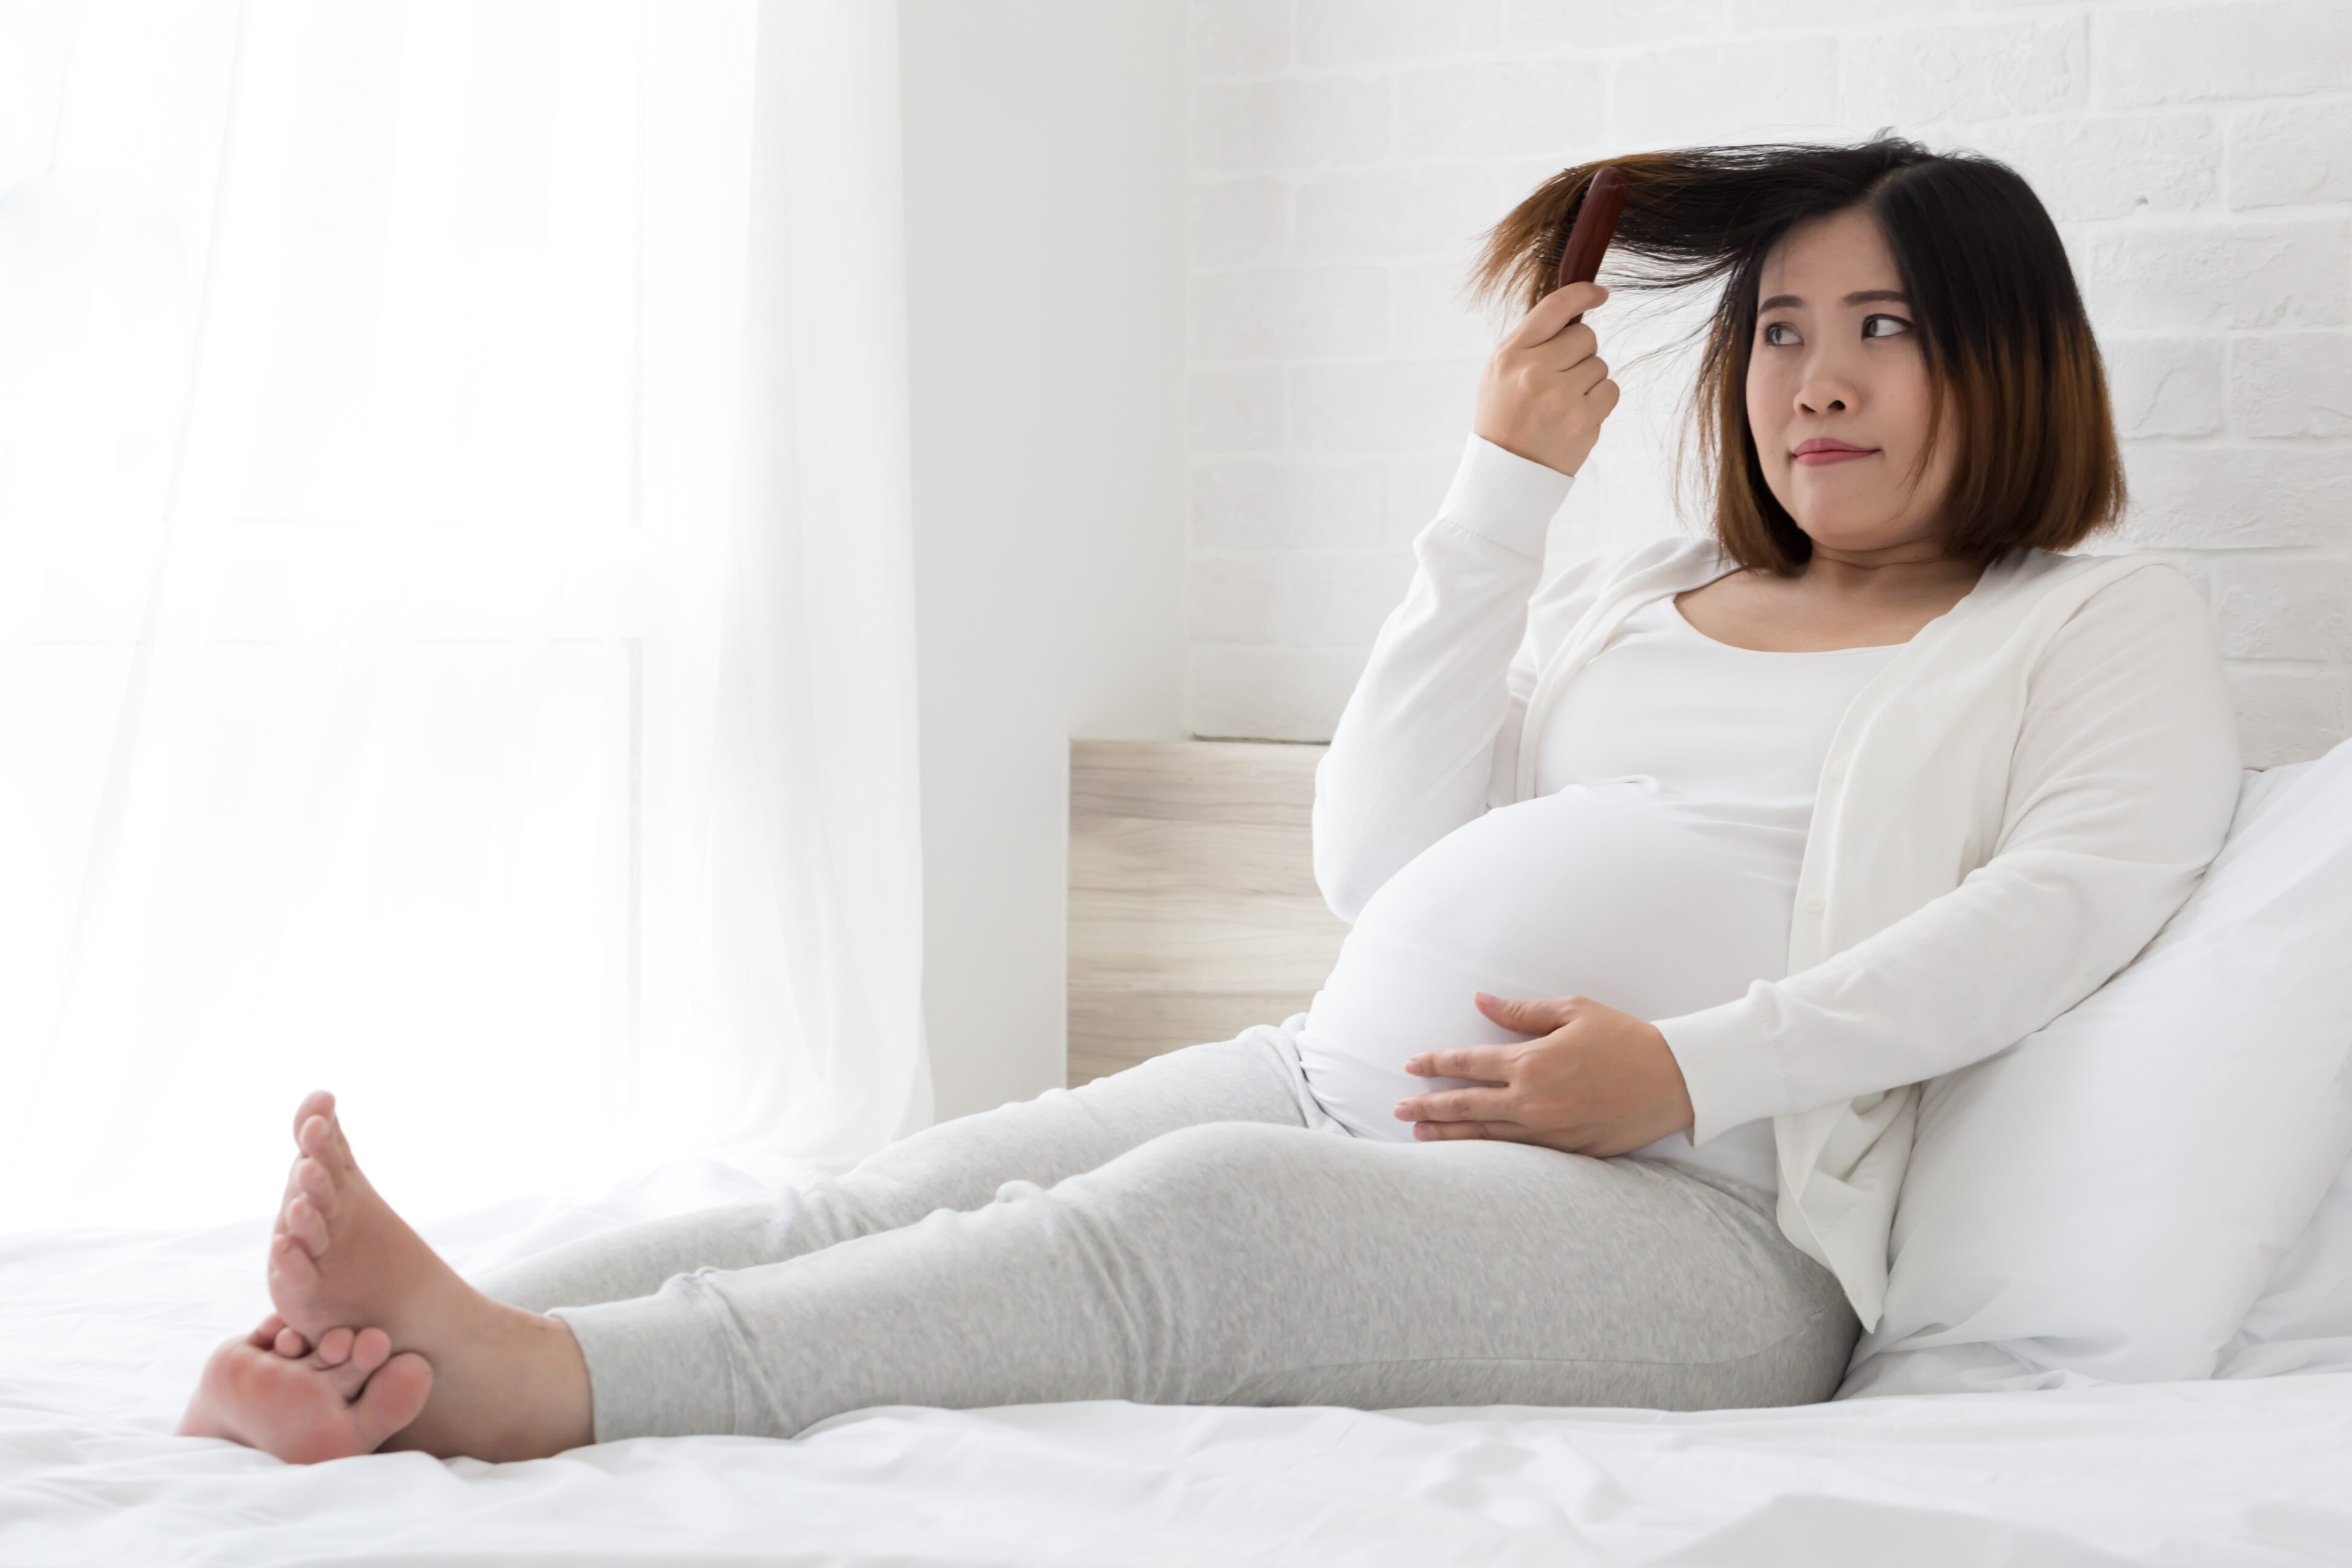 Pregnancy is a hair growth but a temporary factor.